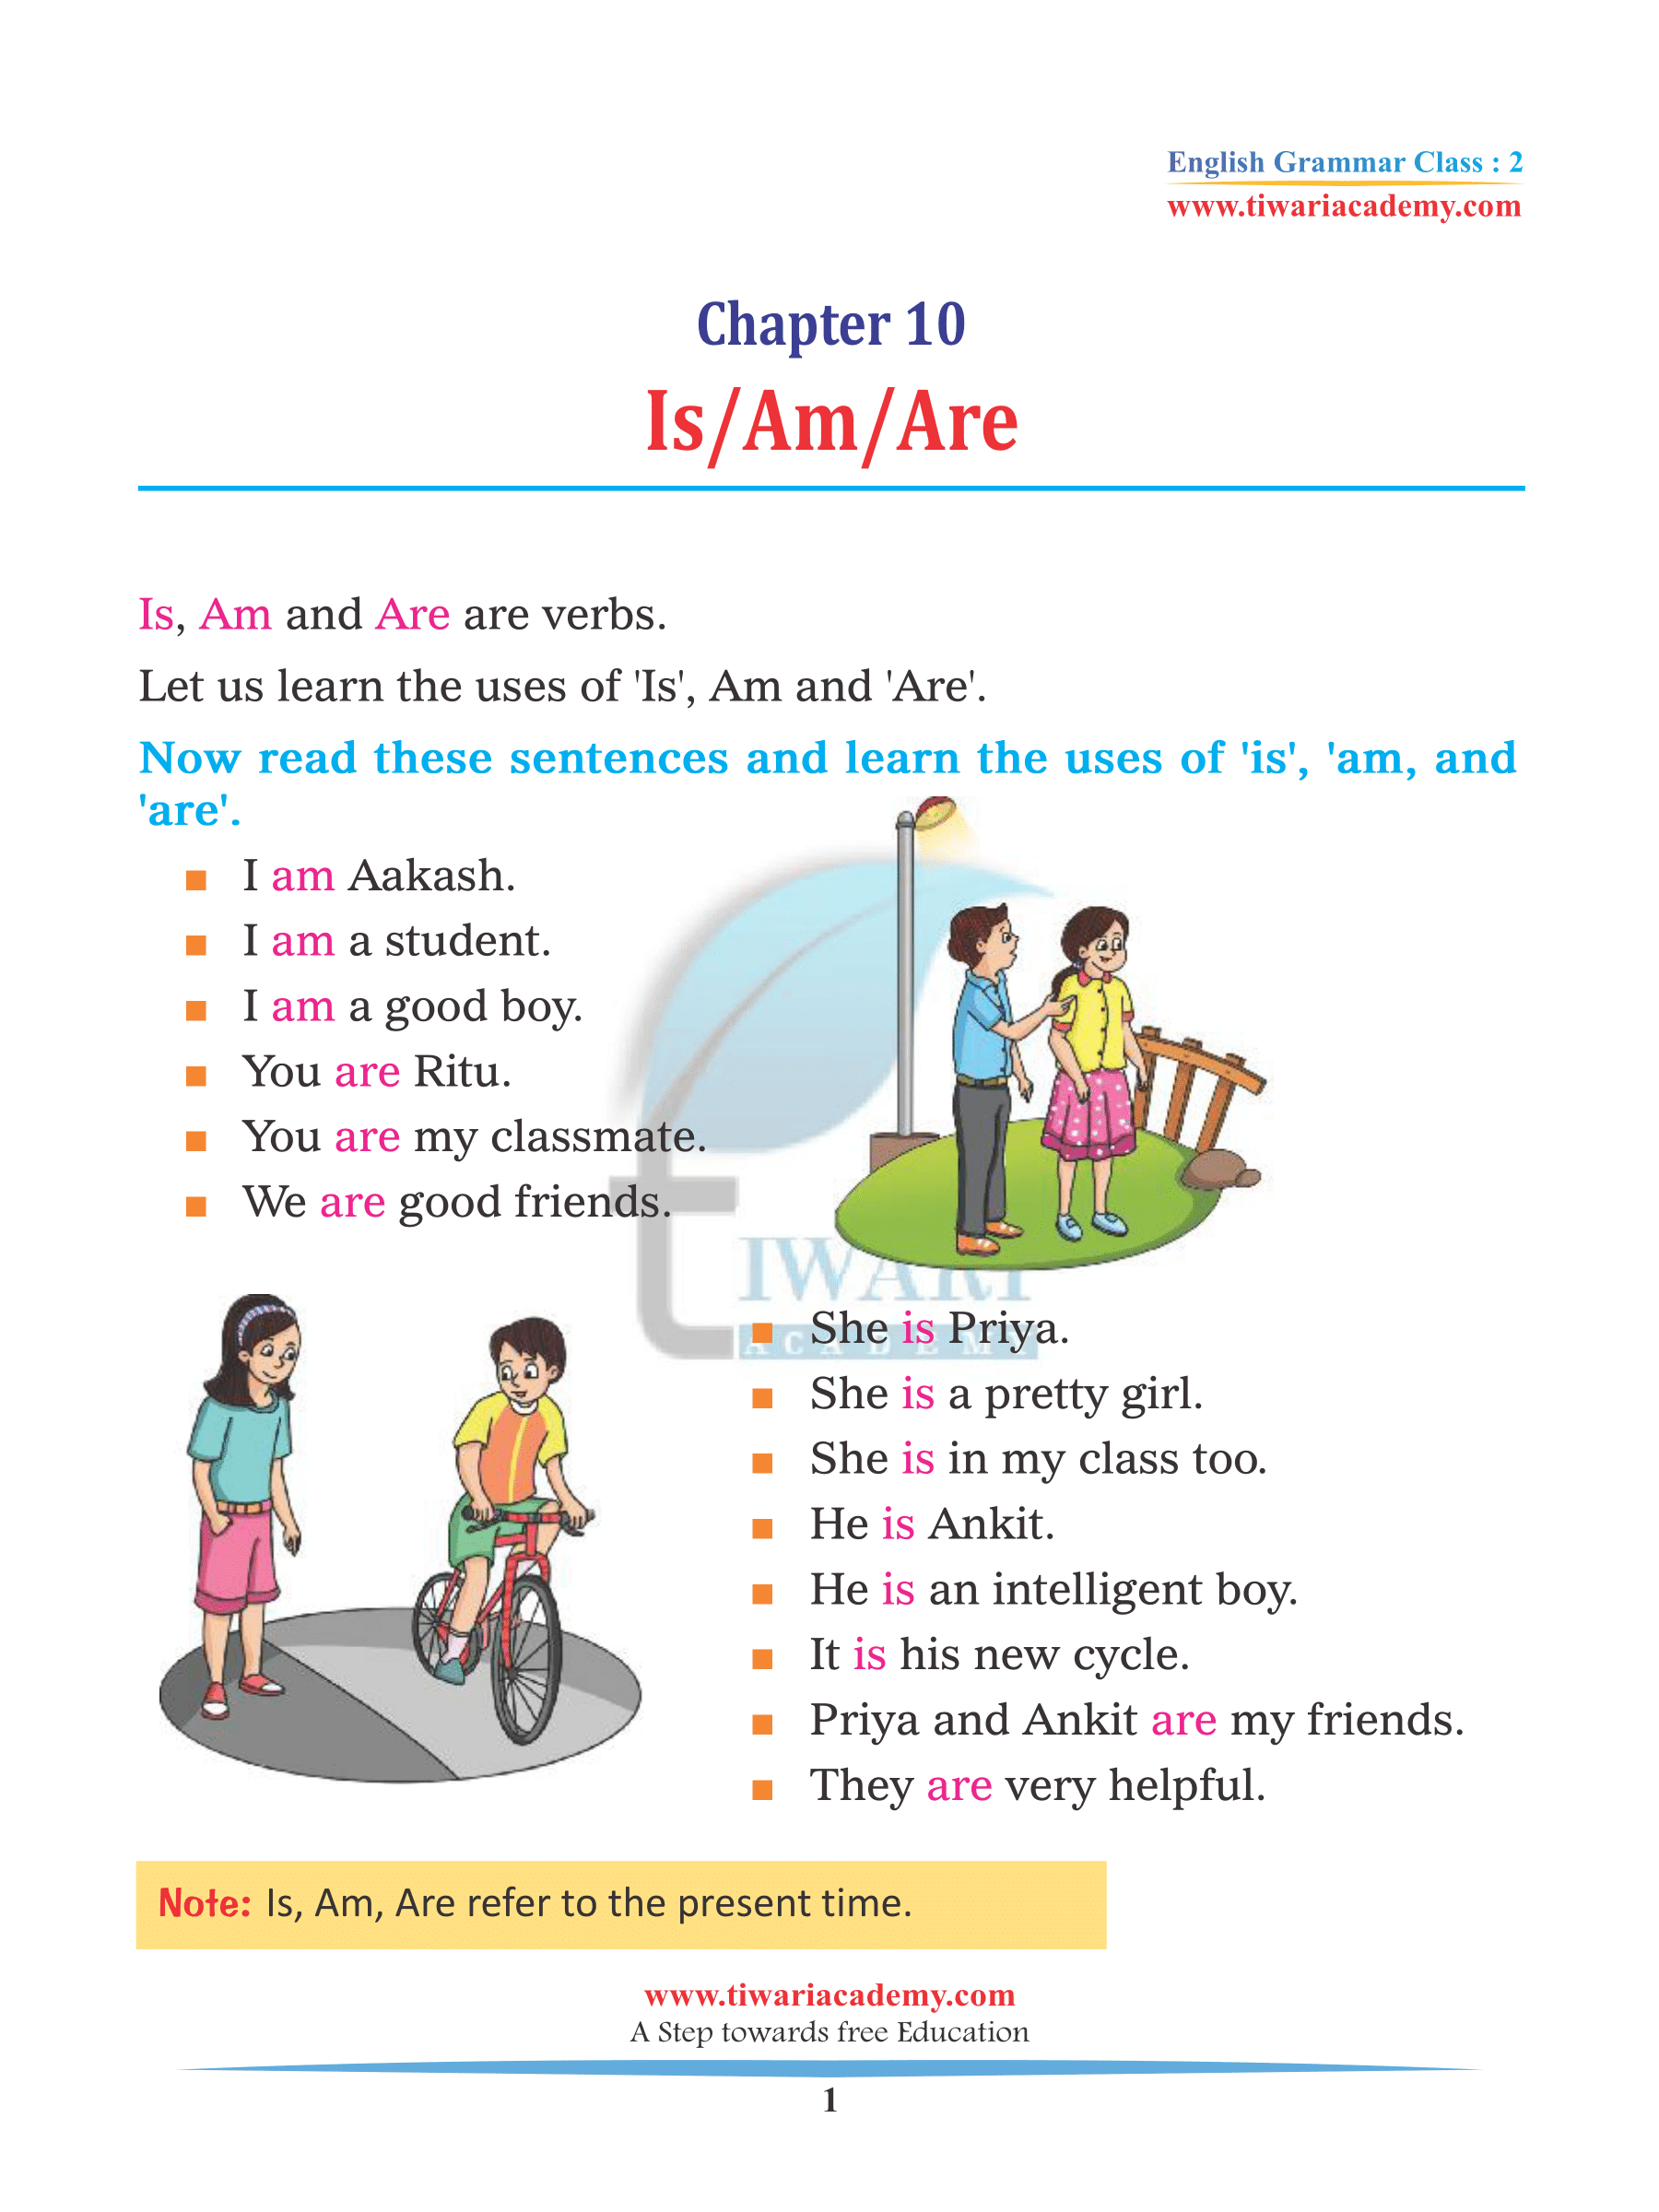 Class 2 English Grammar Chapter 10 Use of is, am, and are